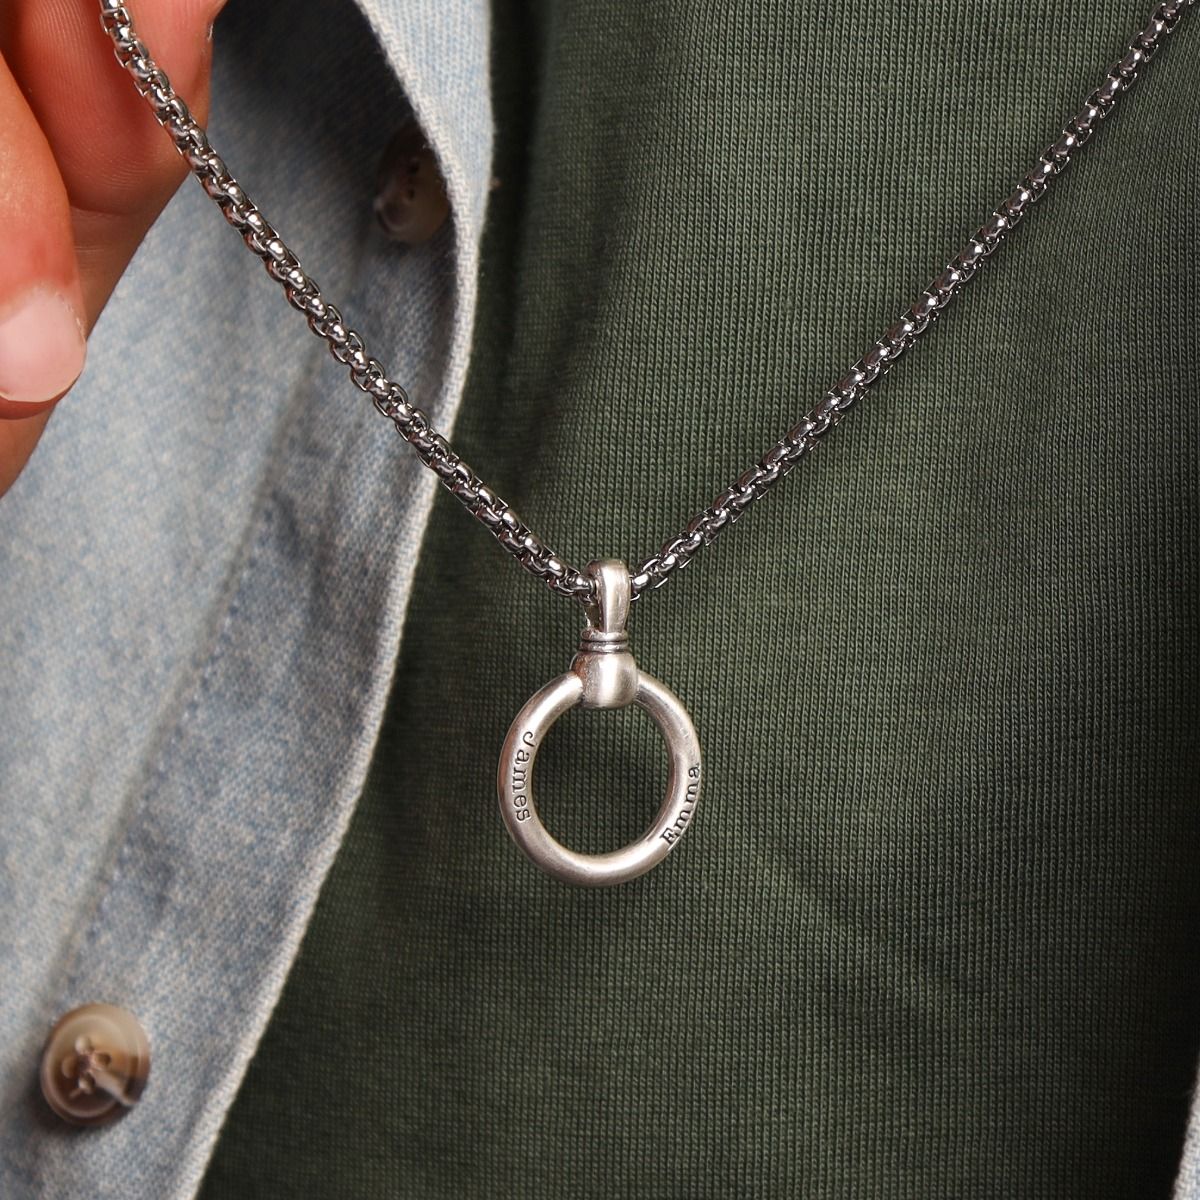 Eternity Circle Necklace with Names (Silver) - Luxury Christmas Gifts for Men